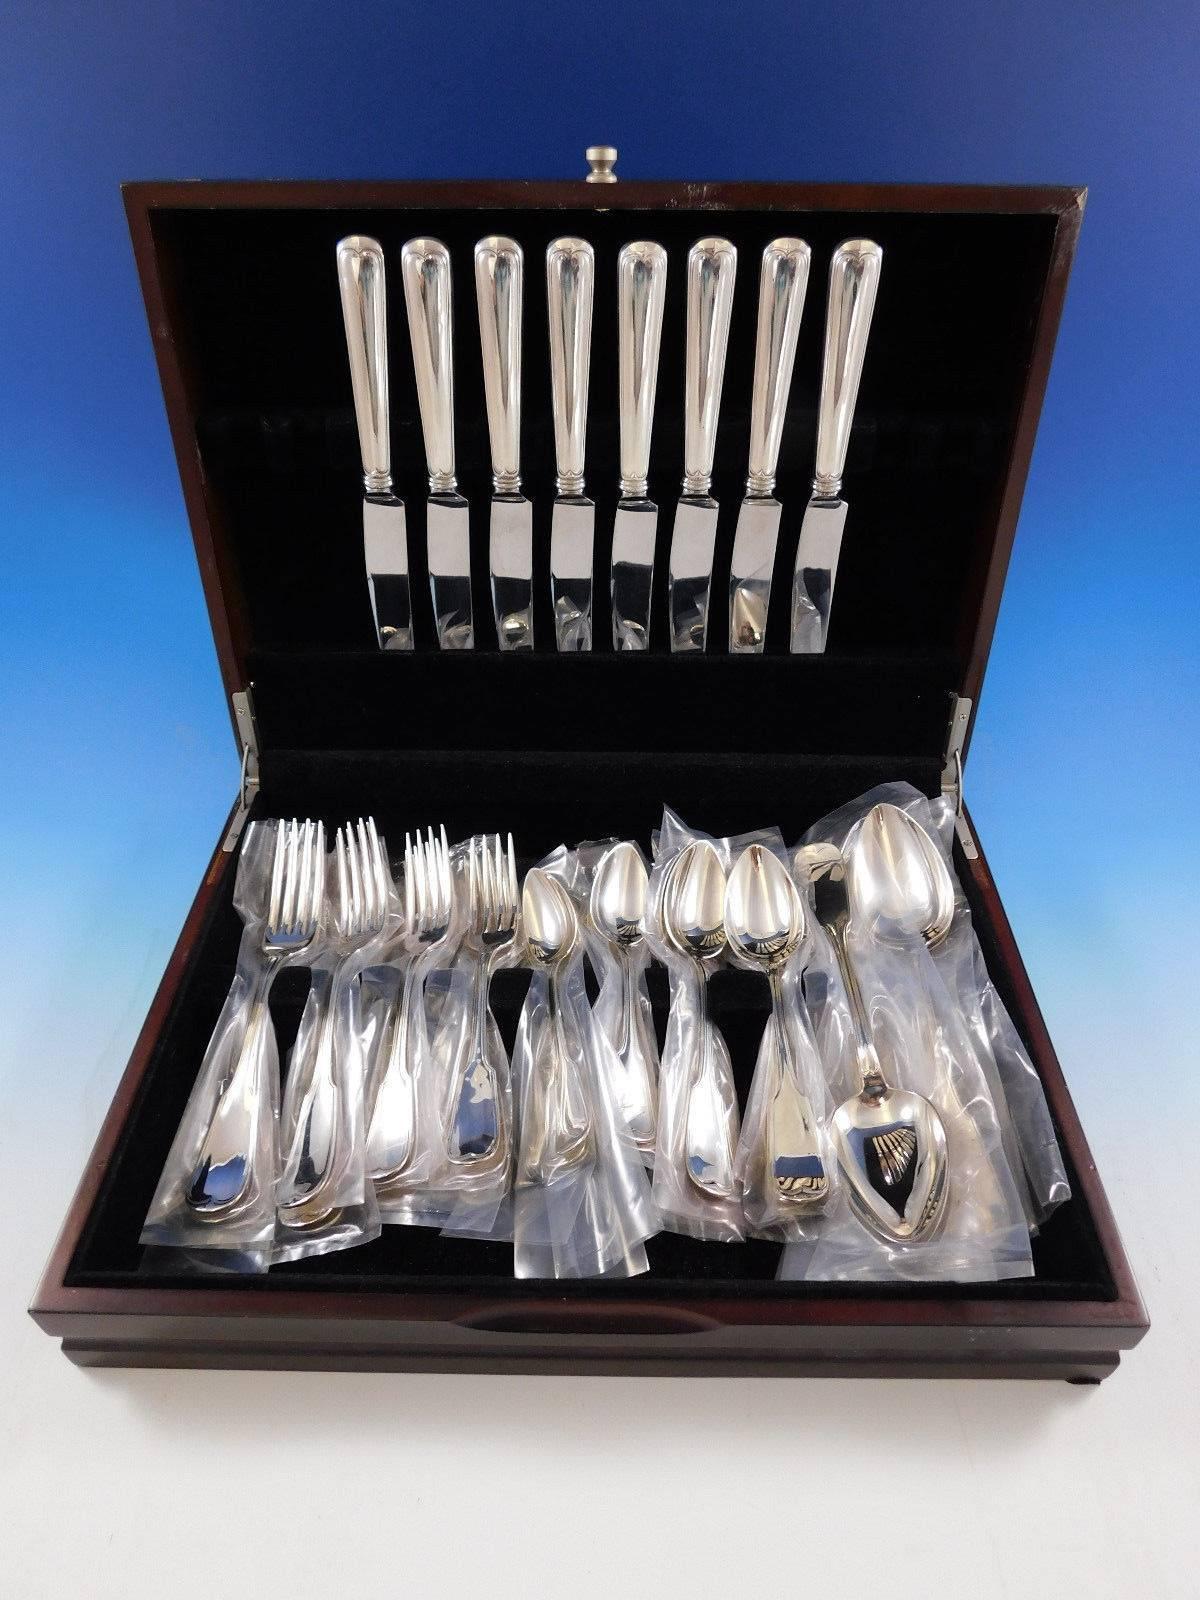 Dinner size threaded antique by Gorham sterling silver flatware set of 48 pieces. This set includes: Eight dinner size knives, 9 3/4